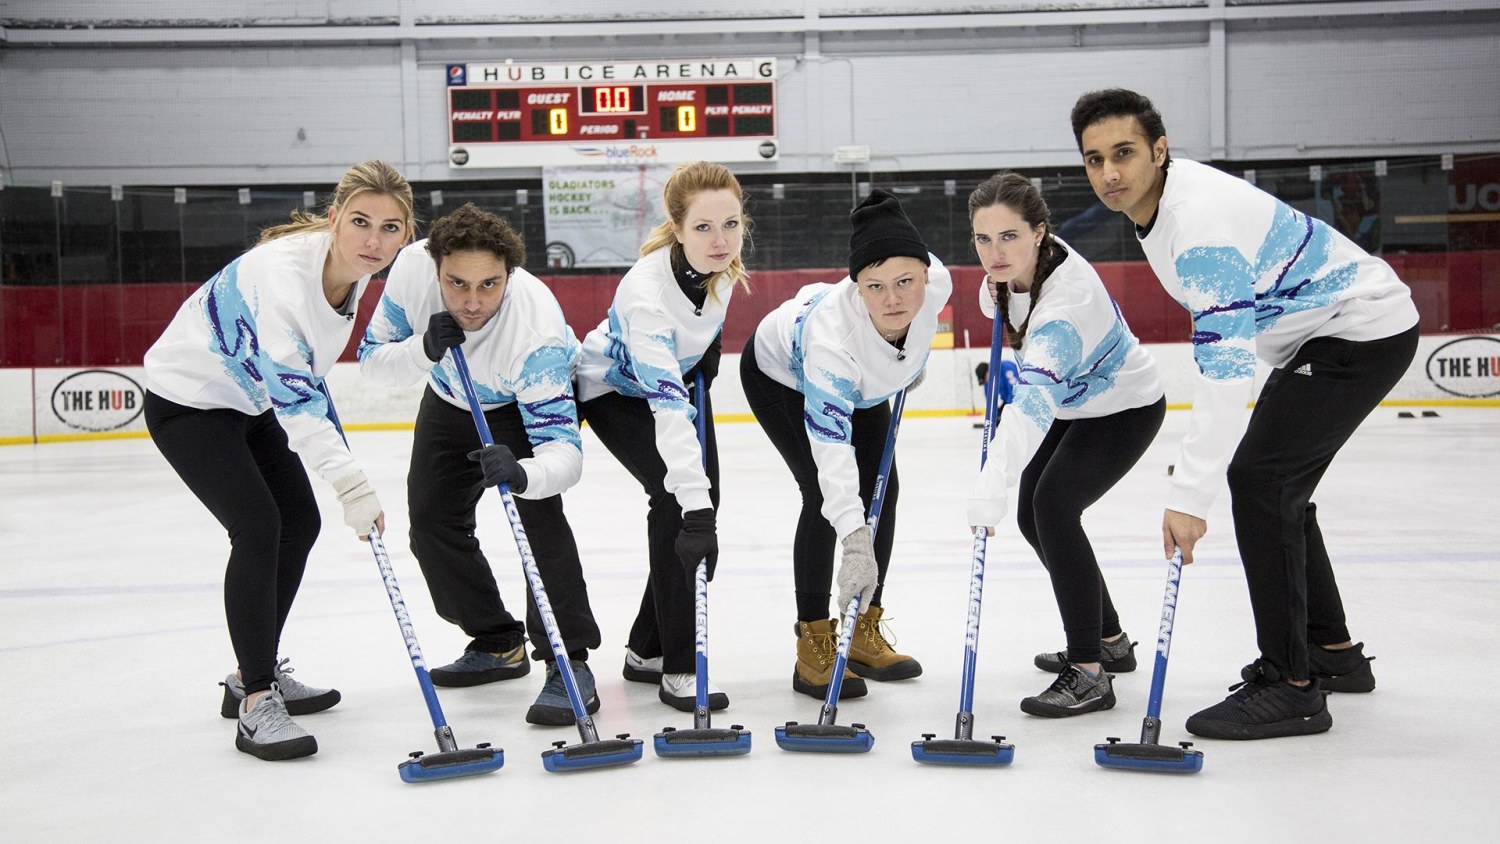 Curling, the Olympic sport you need to know more about